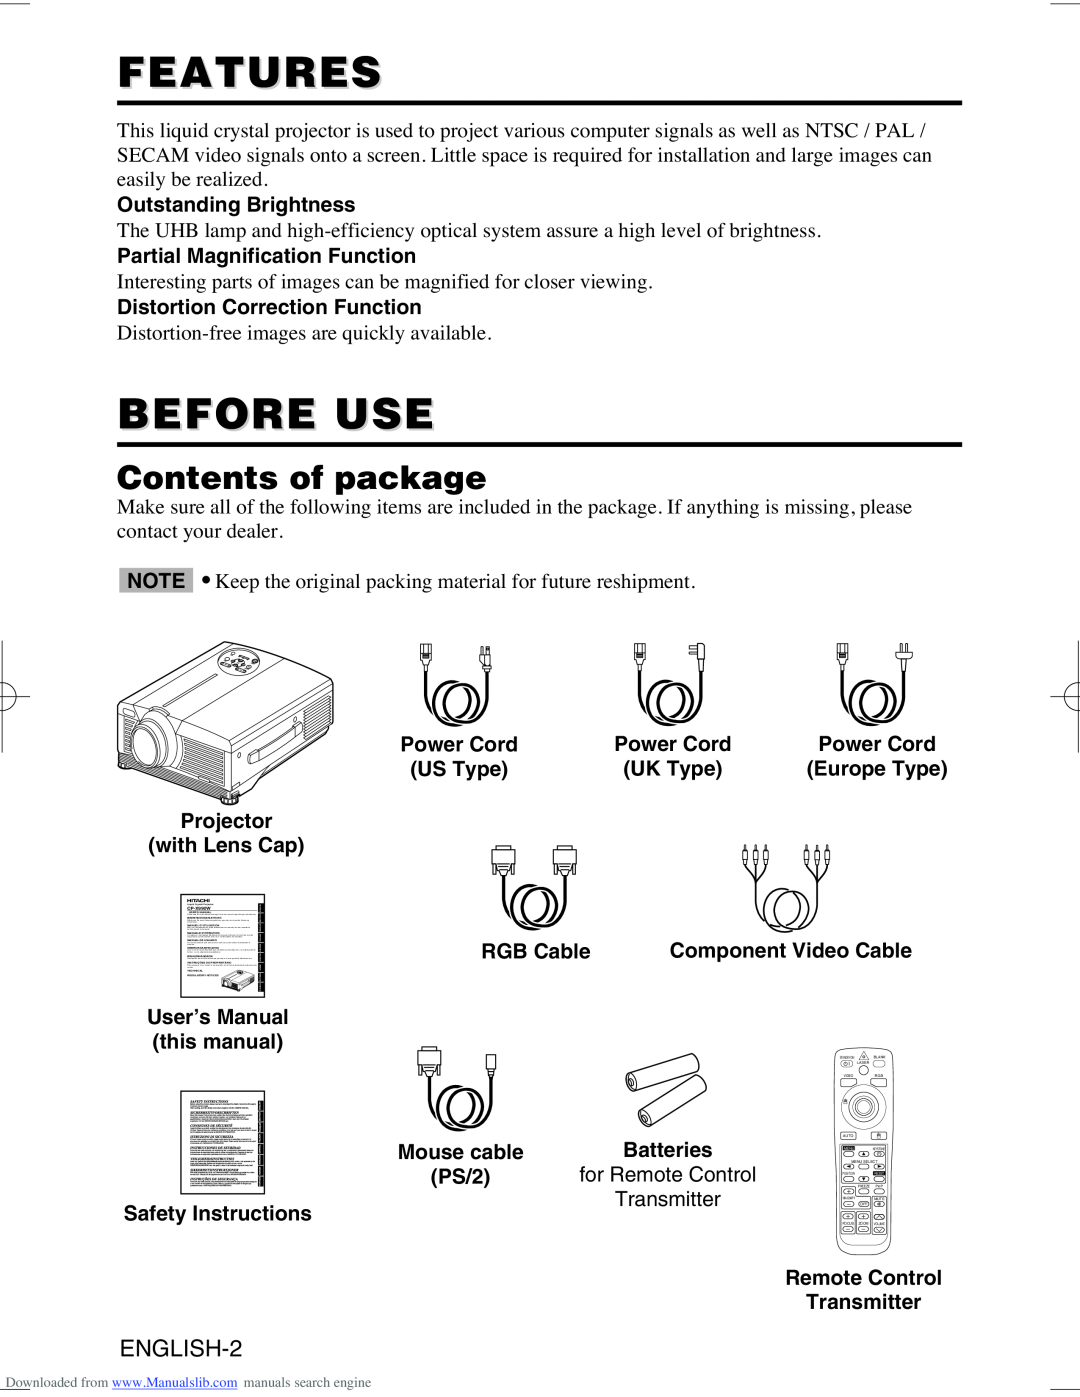 Hitachi CP-X995W user manual Features, Before Use, Contents of package 